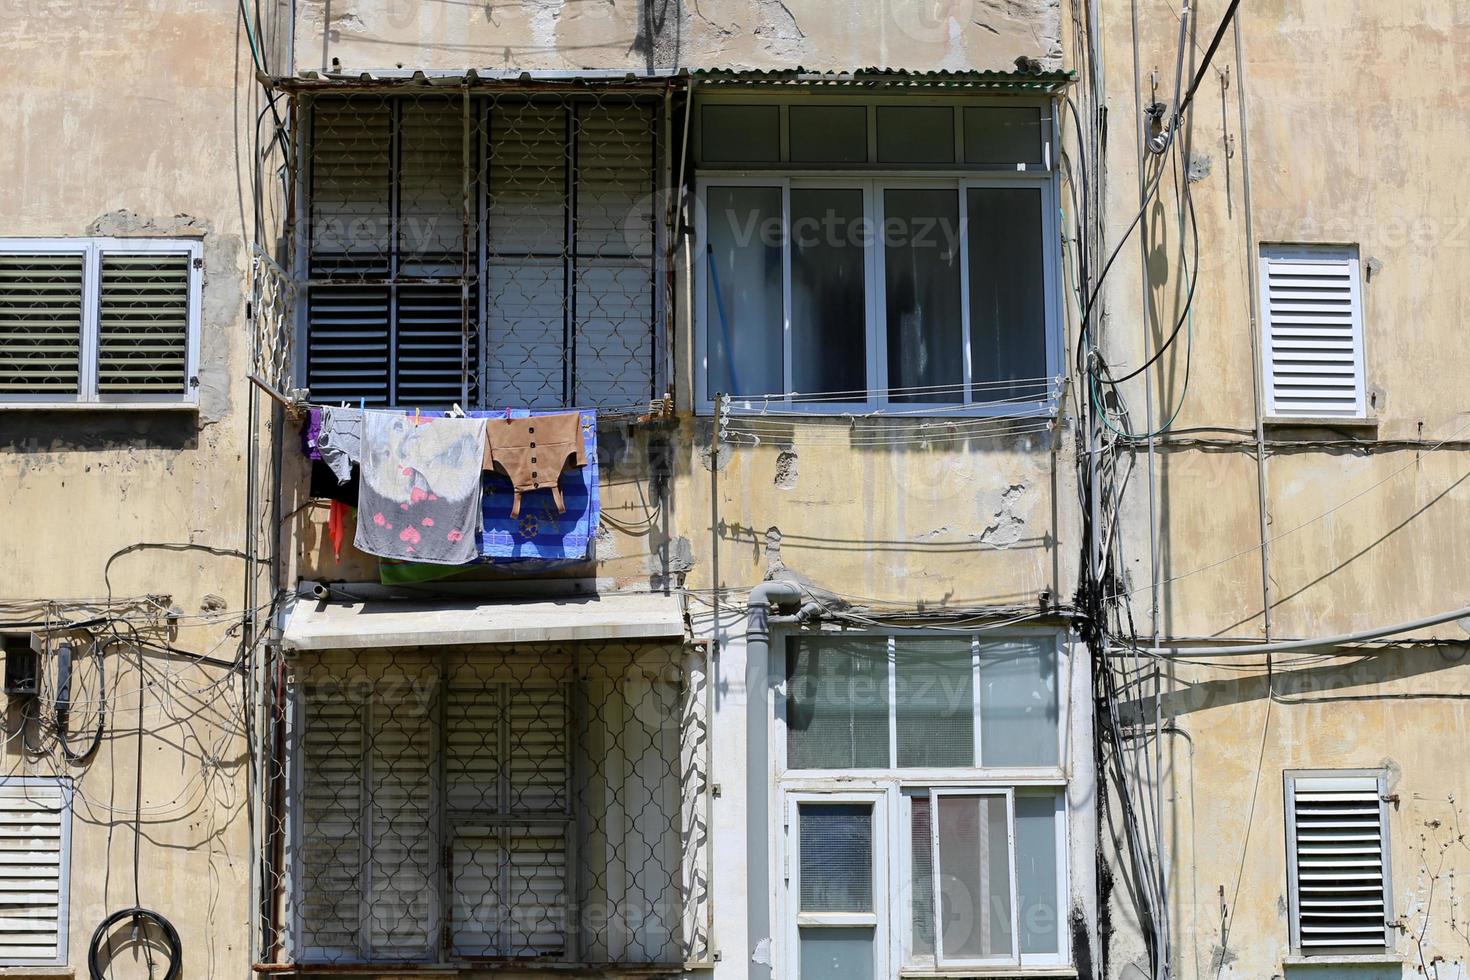 Washed clothes and linen dries on the balcony. photo